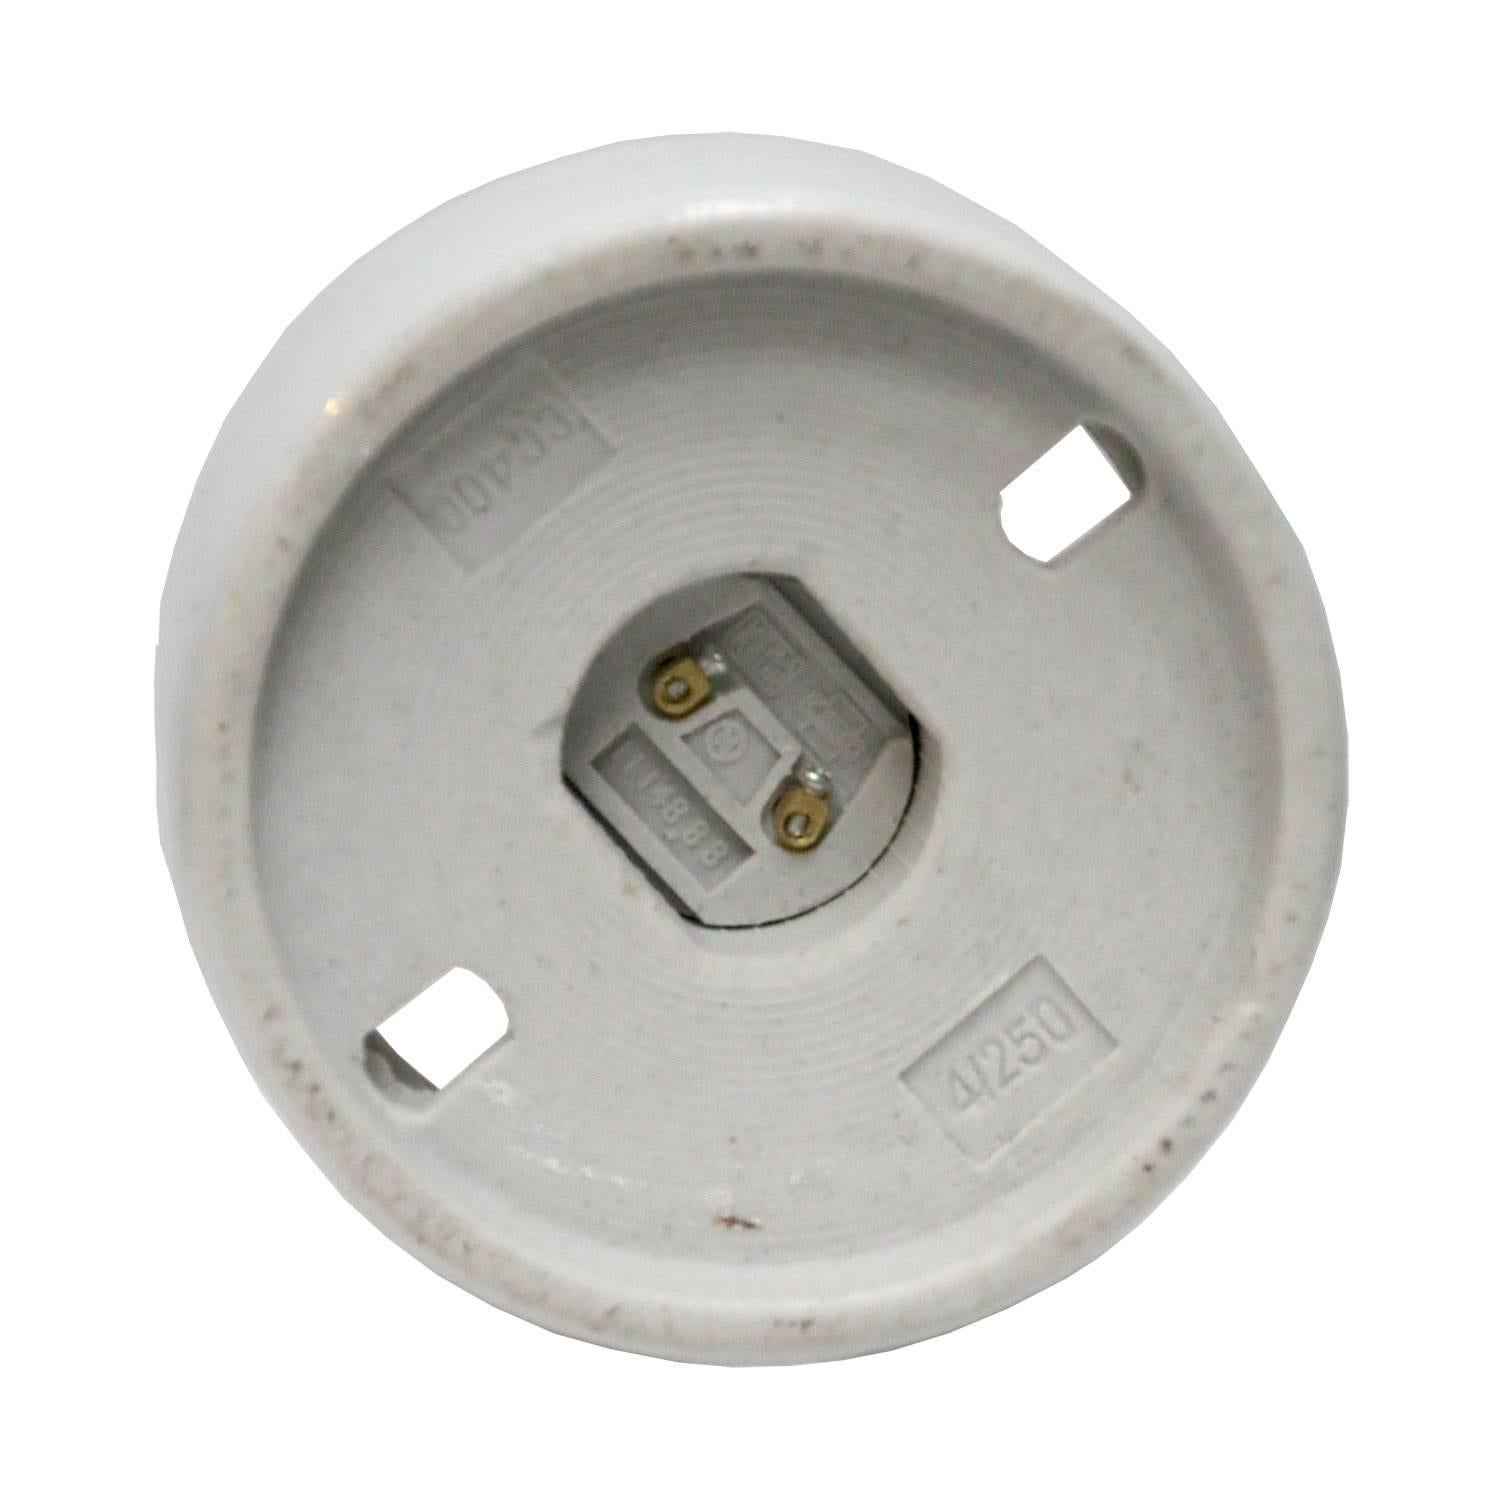 Industrial wall lamp scone. White porcelain. Clear glass.

2 conductors, no ground.
Measures: Diameter foot 10 cm
Suitable for 110 volt USA
new wiring is CE certified (220 volt)  or UL Listed (110 volt) 

Measure: Weight: 0.8 kg / 1.8 lb

Priced per